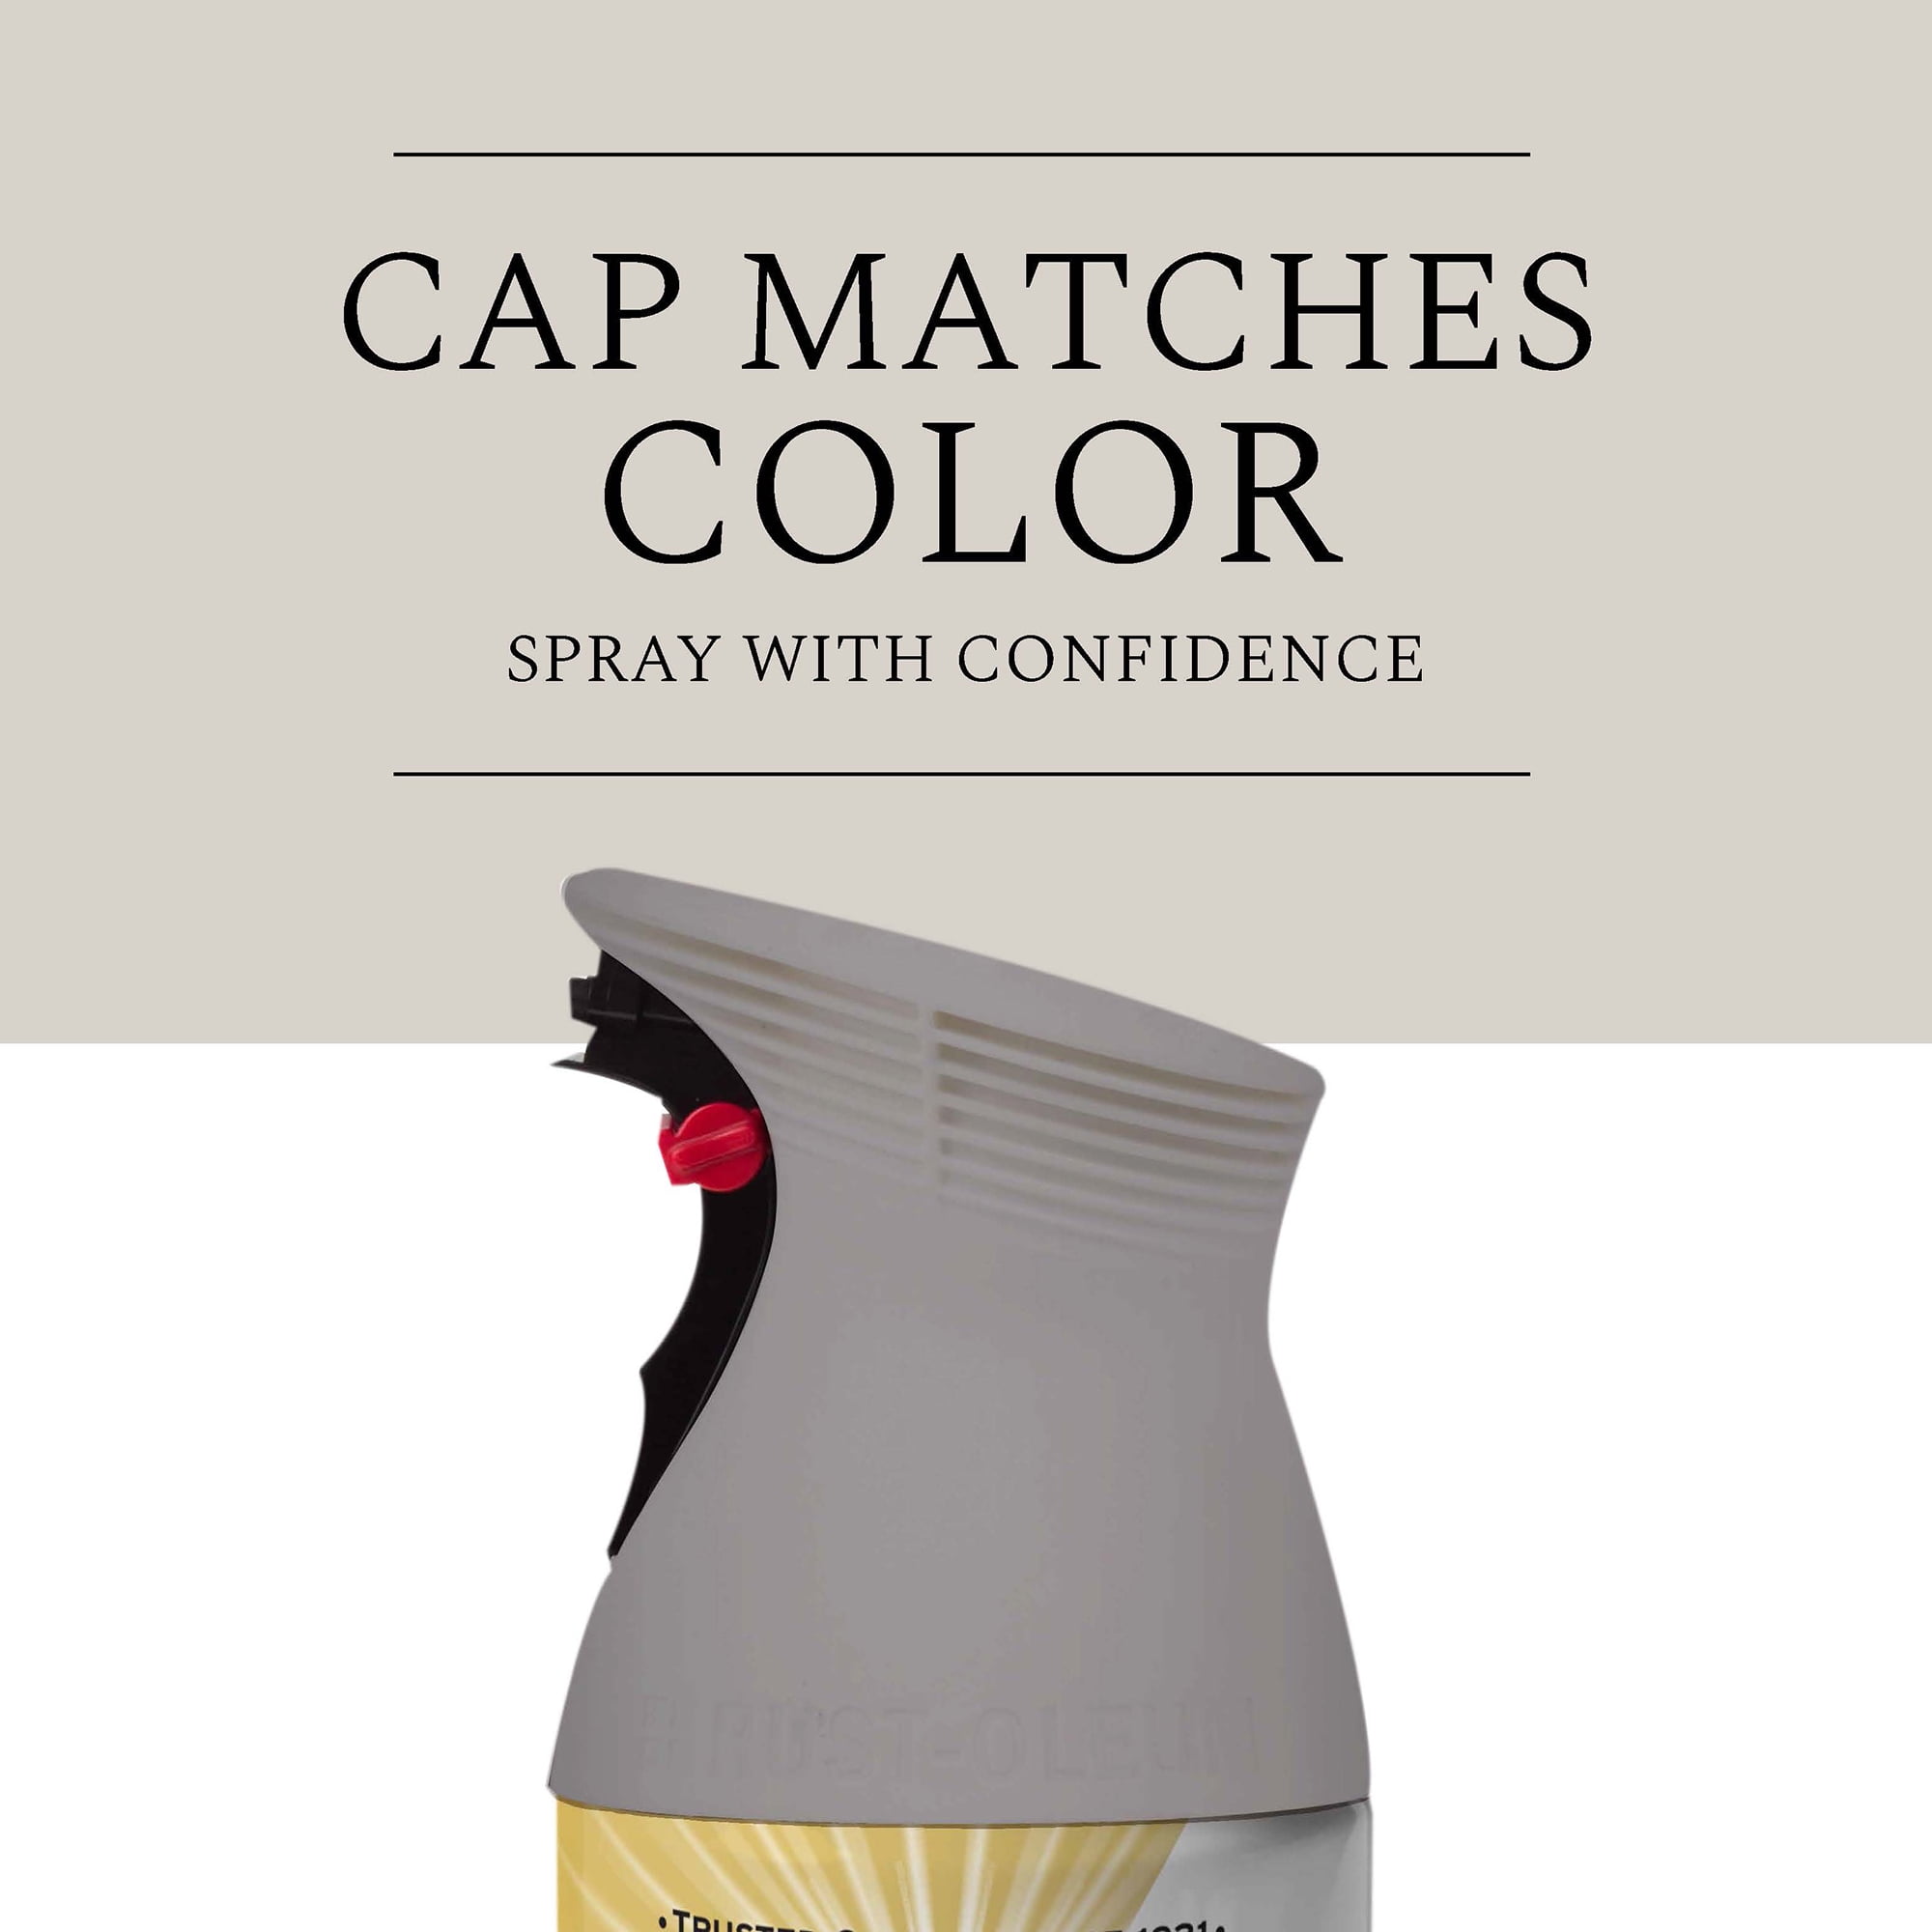 MyPerfectColor Stanley Beige Precisely Matched For Paint and Spray